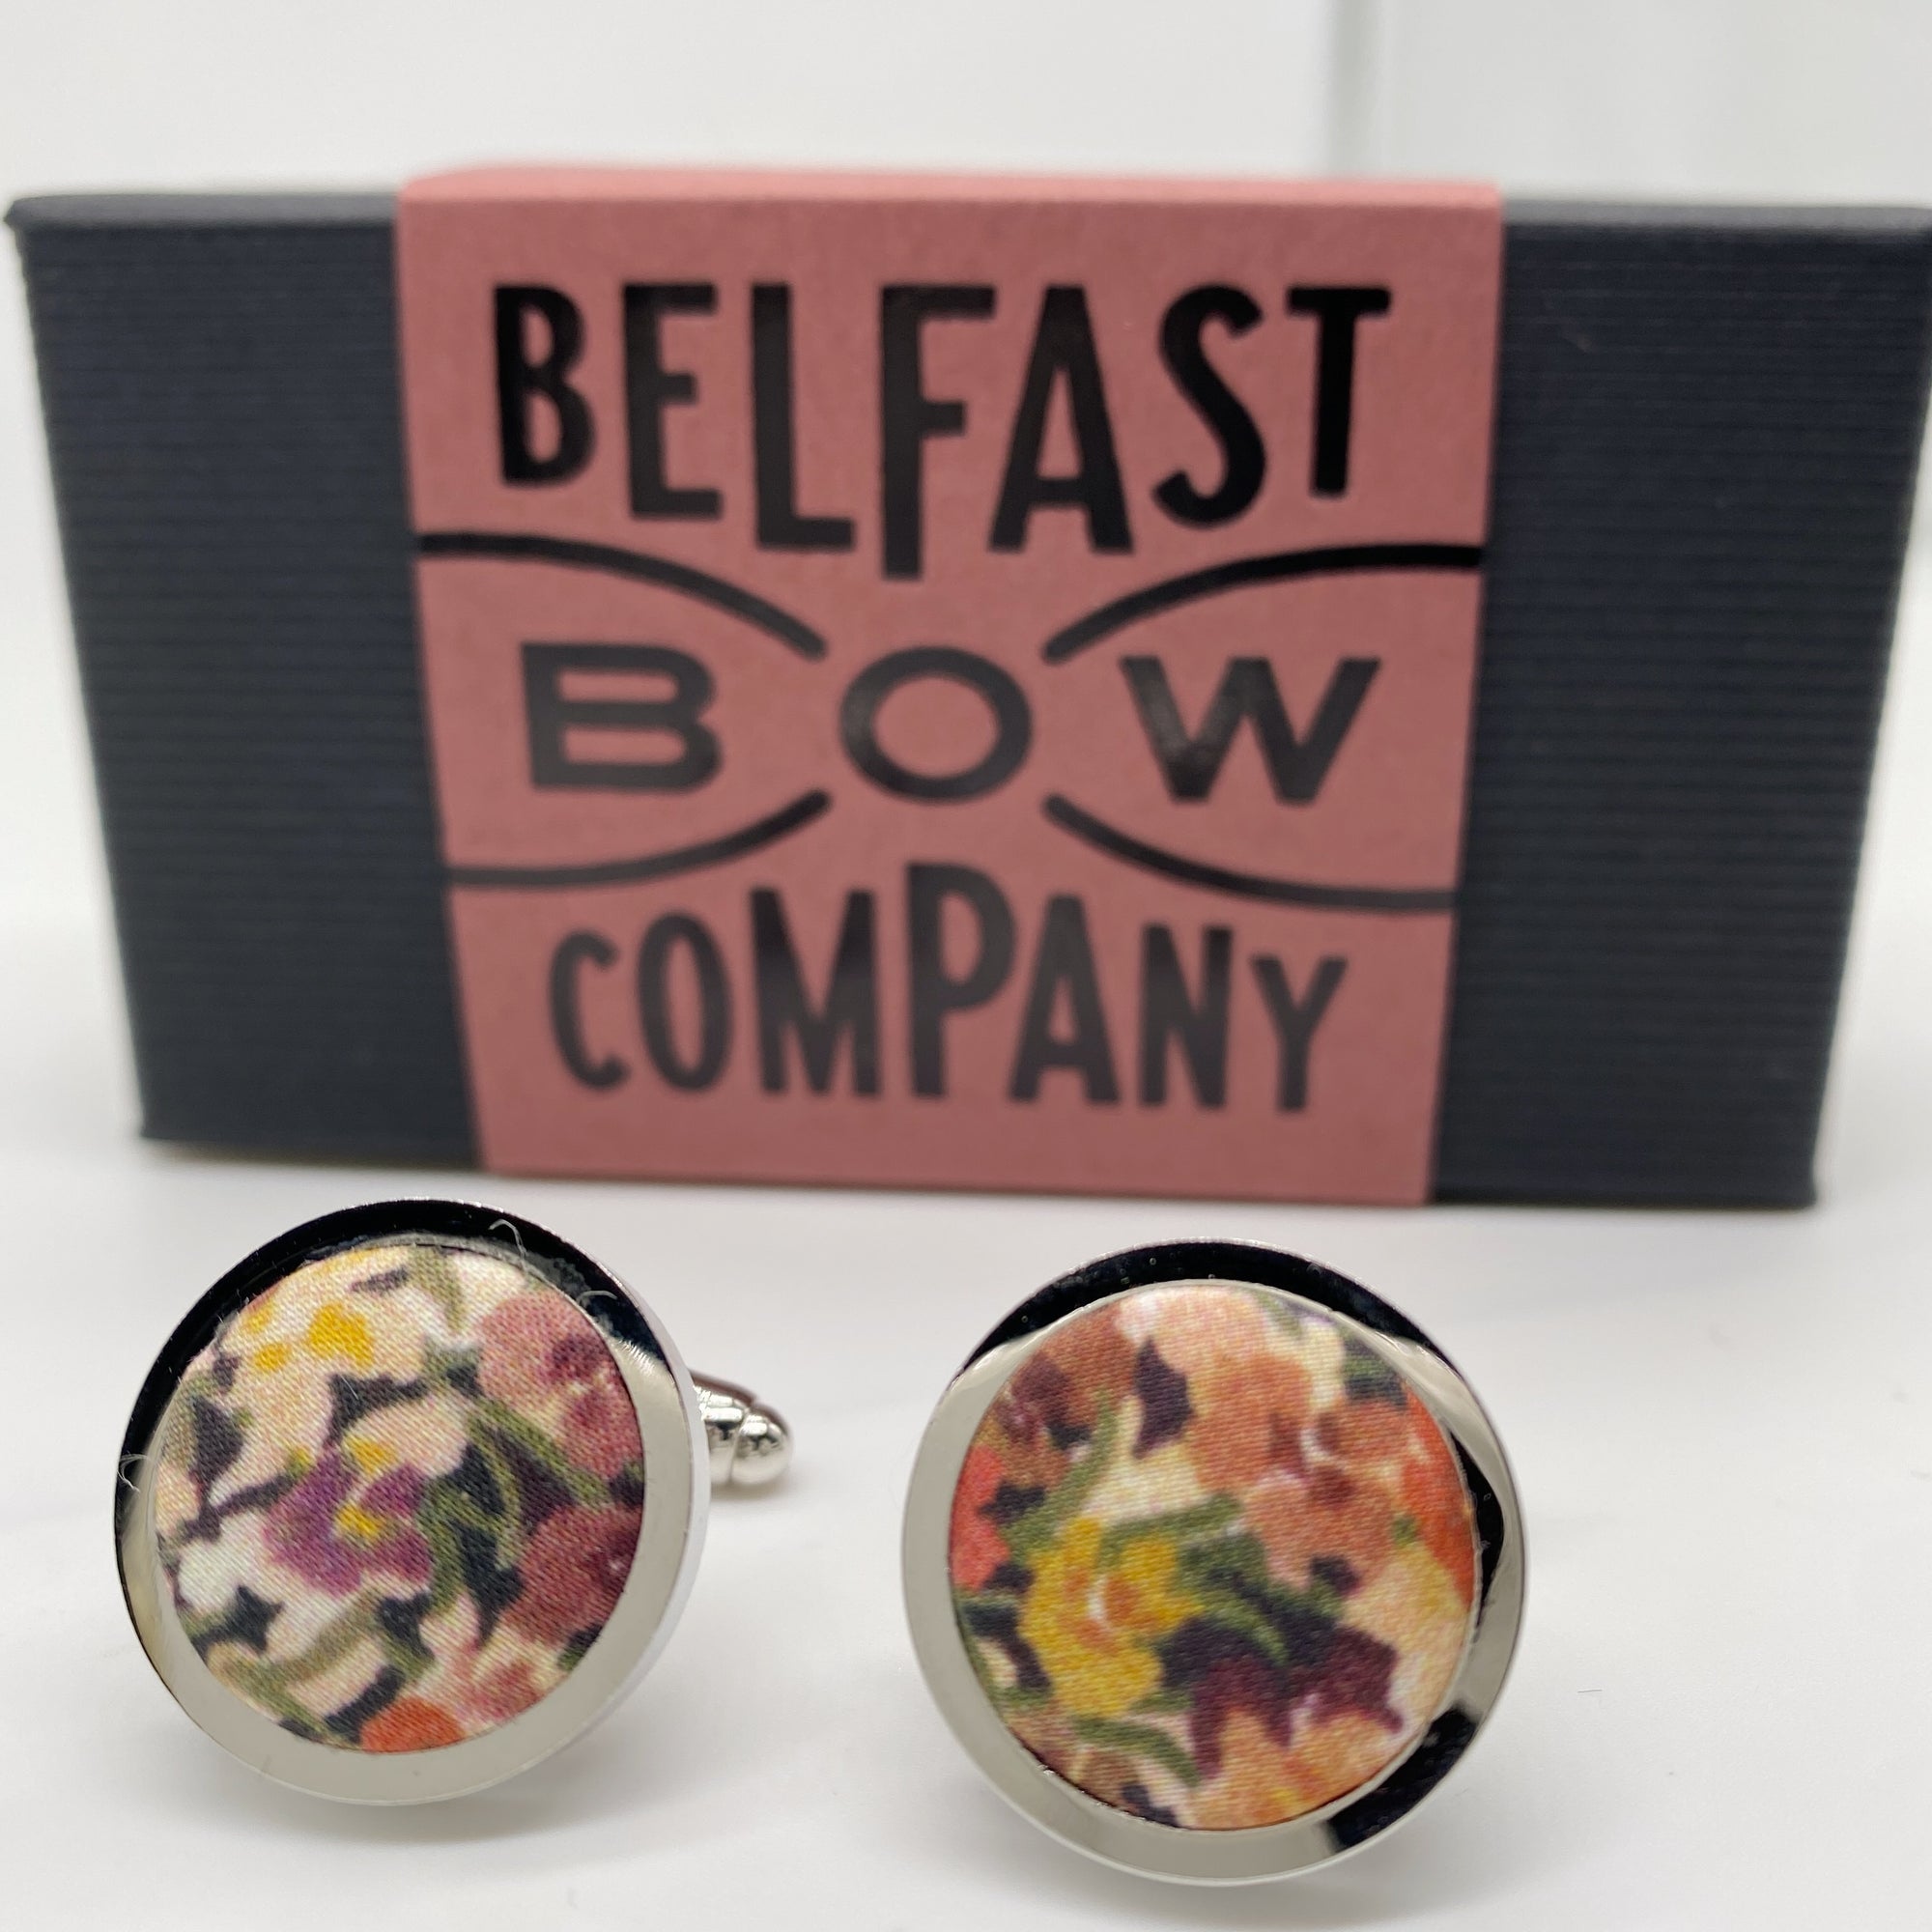 Liberty of London Cufflinks in Vintage Floral